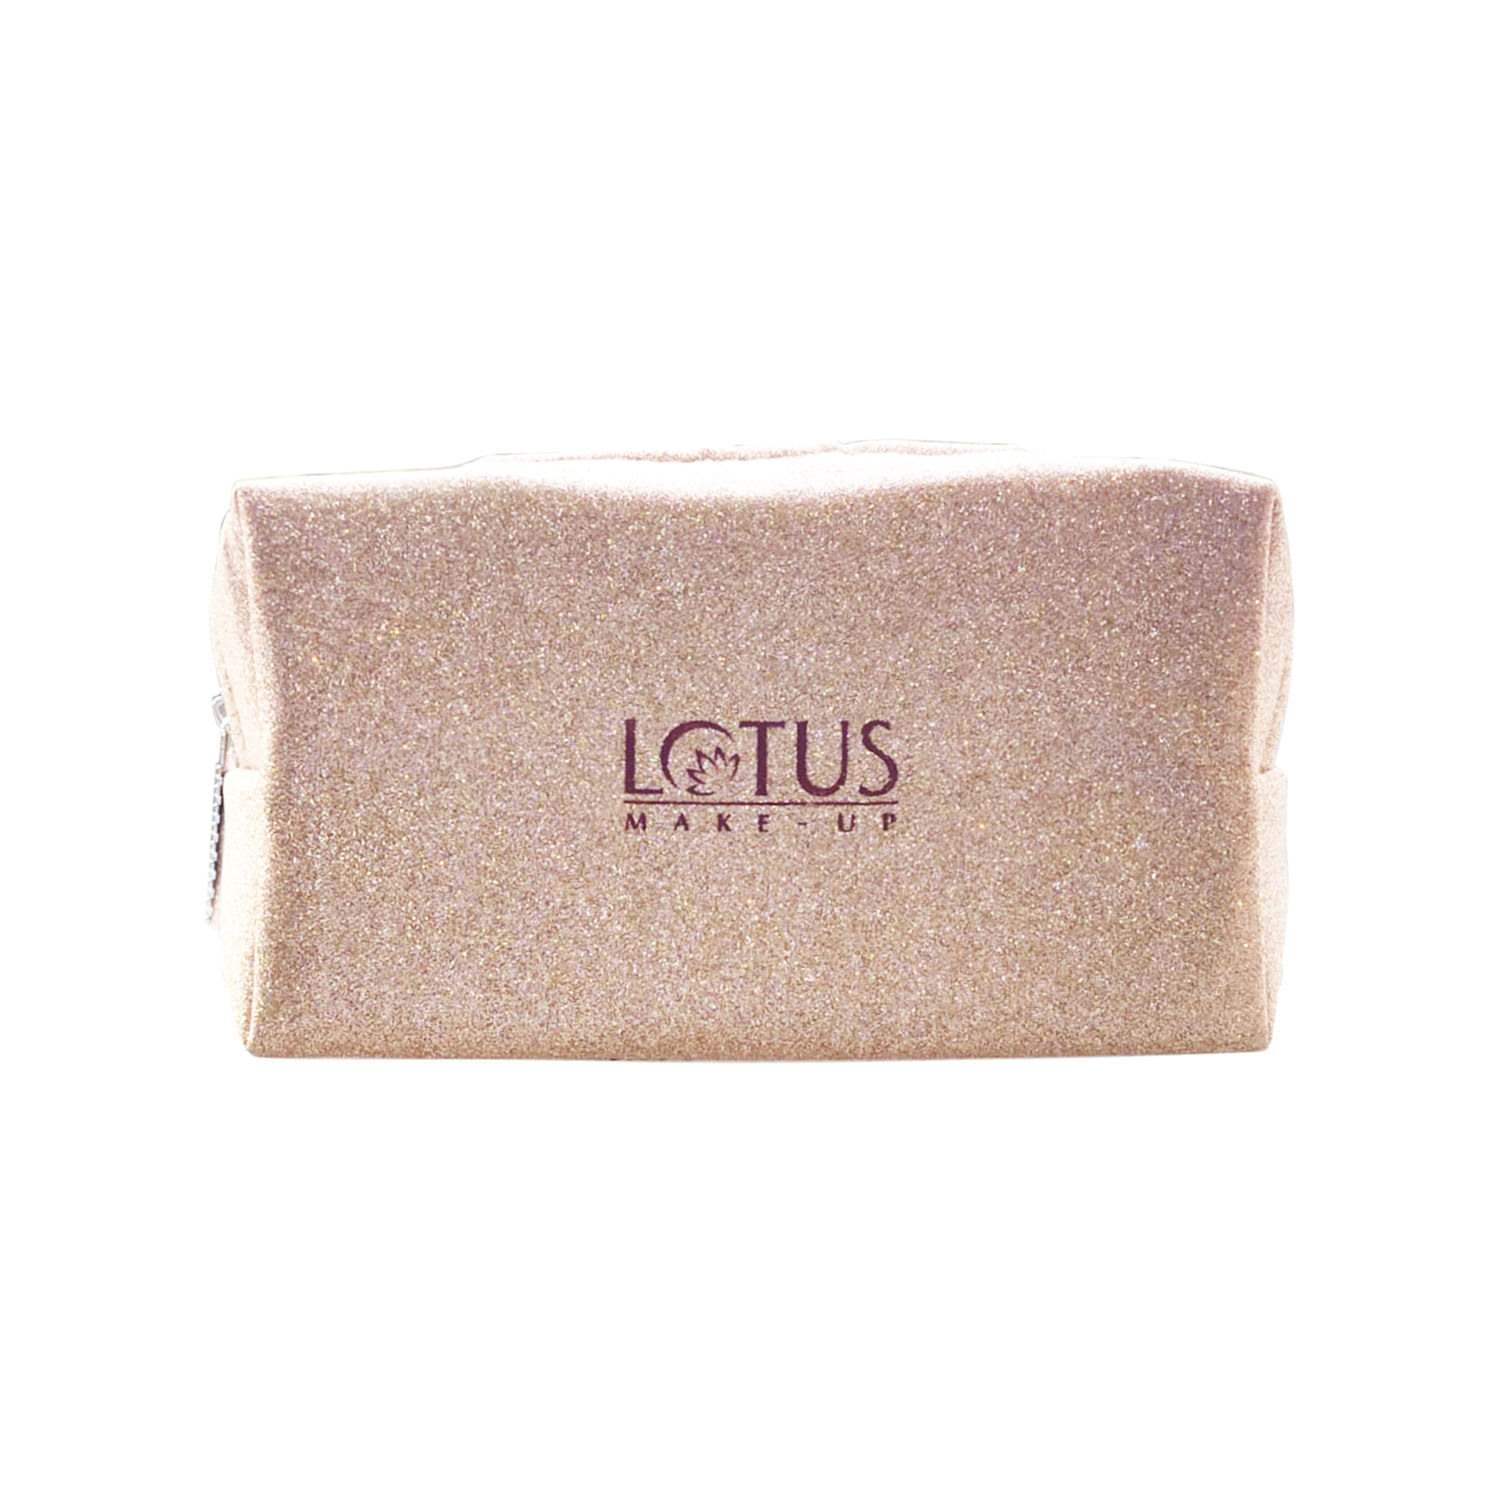 Buy Lotus Makeup Pouch (Free) - Purplle